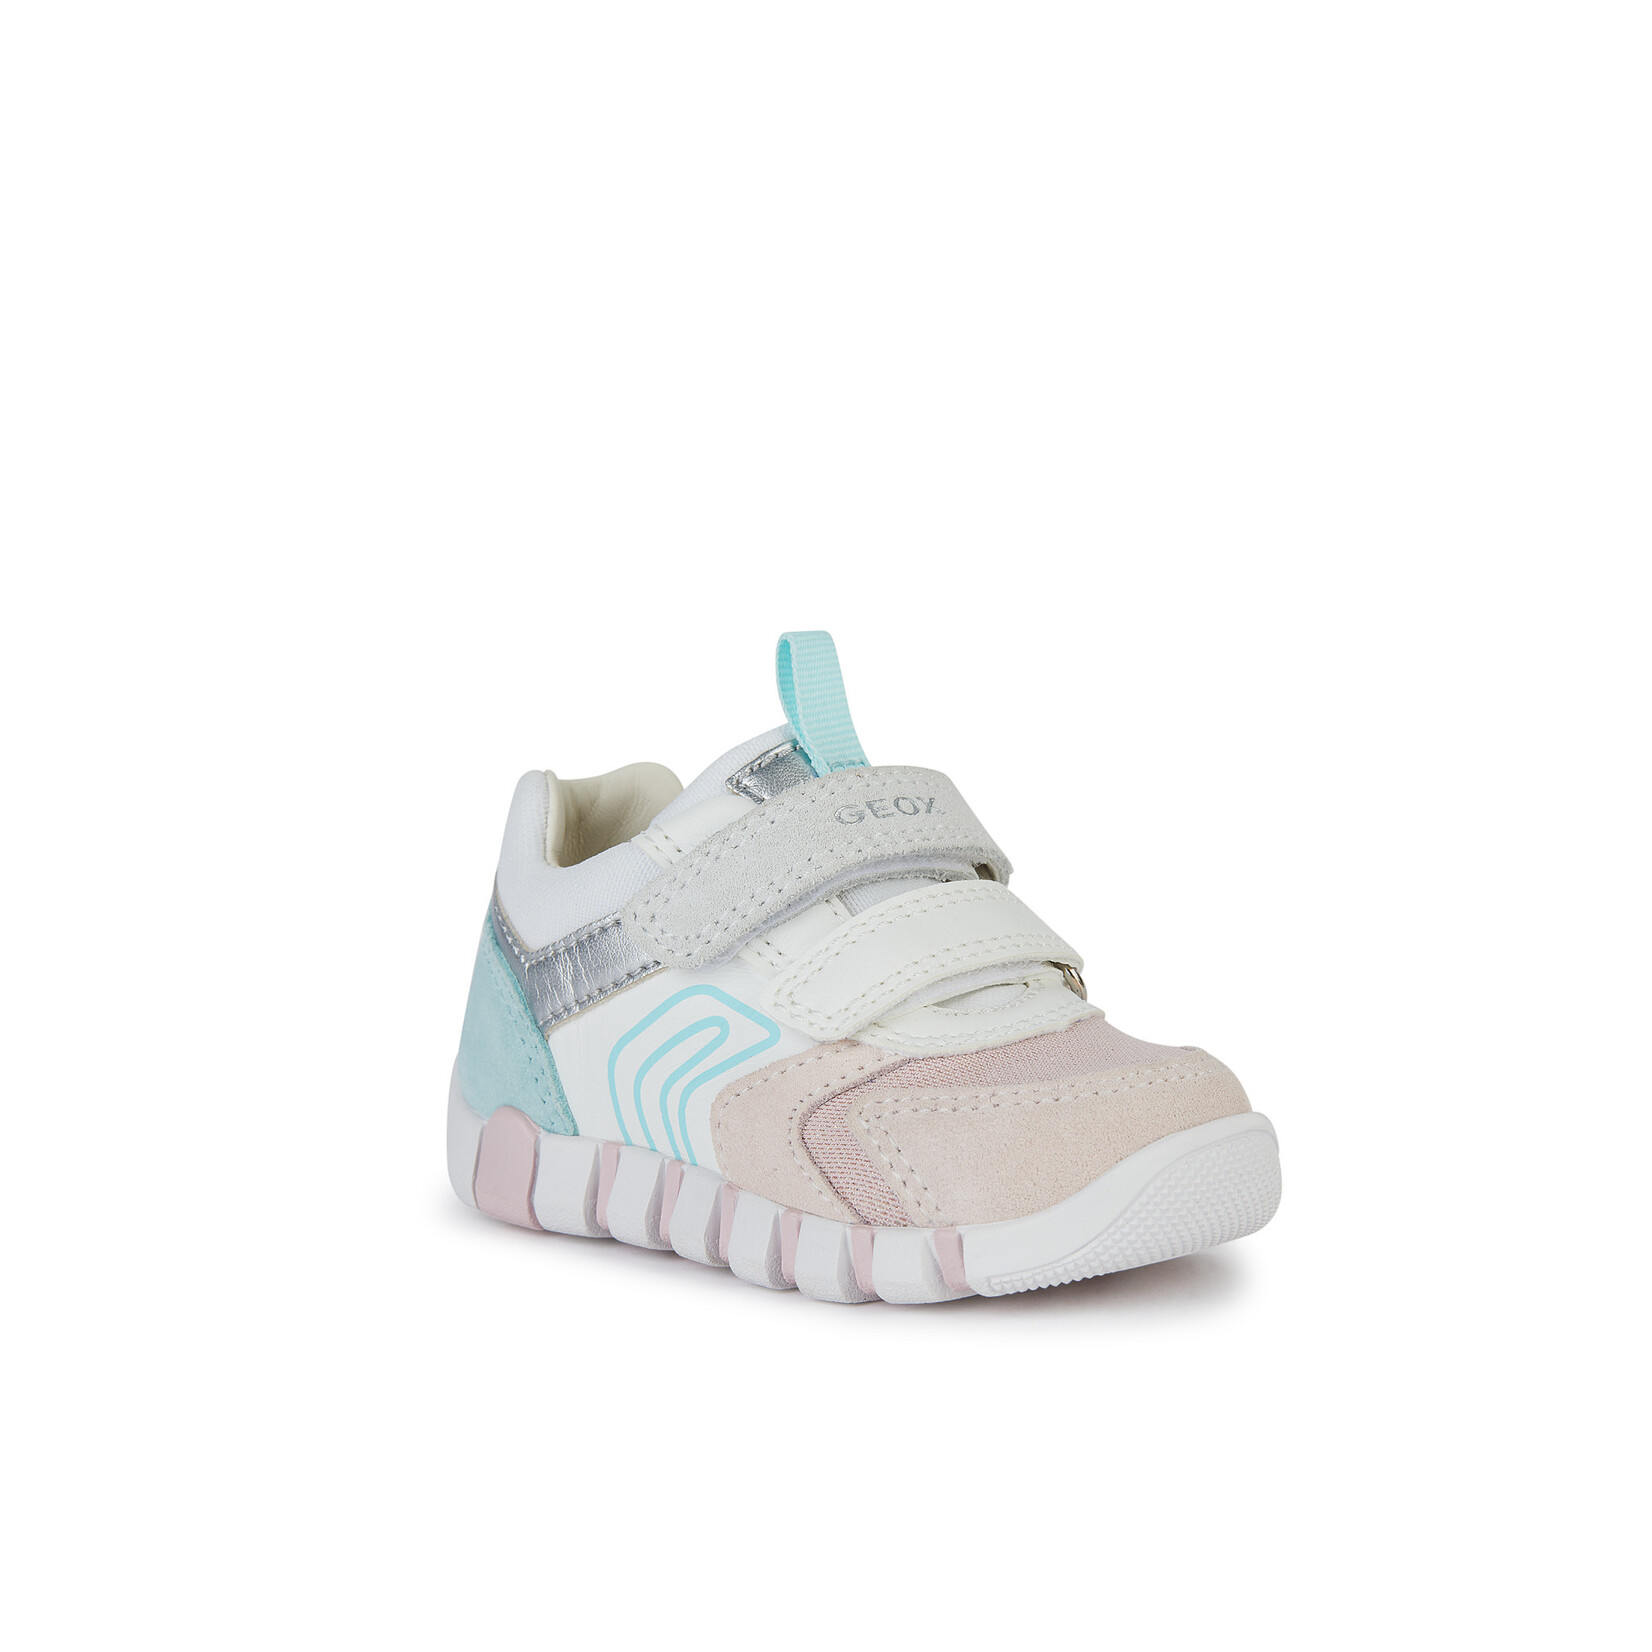 Geox GEOX - Leather and textile shoes 'Iupidoo - White/Antique rose/Light blue'